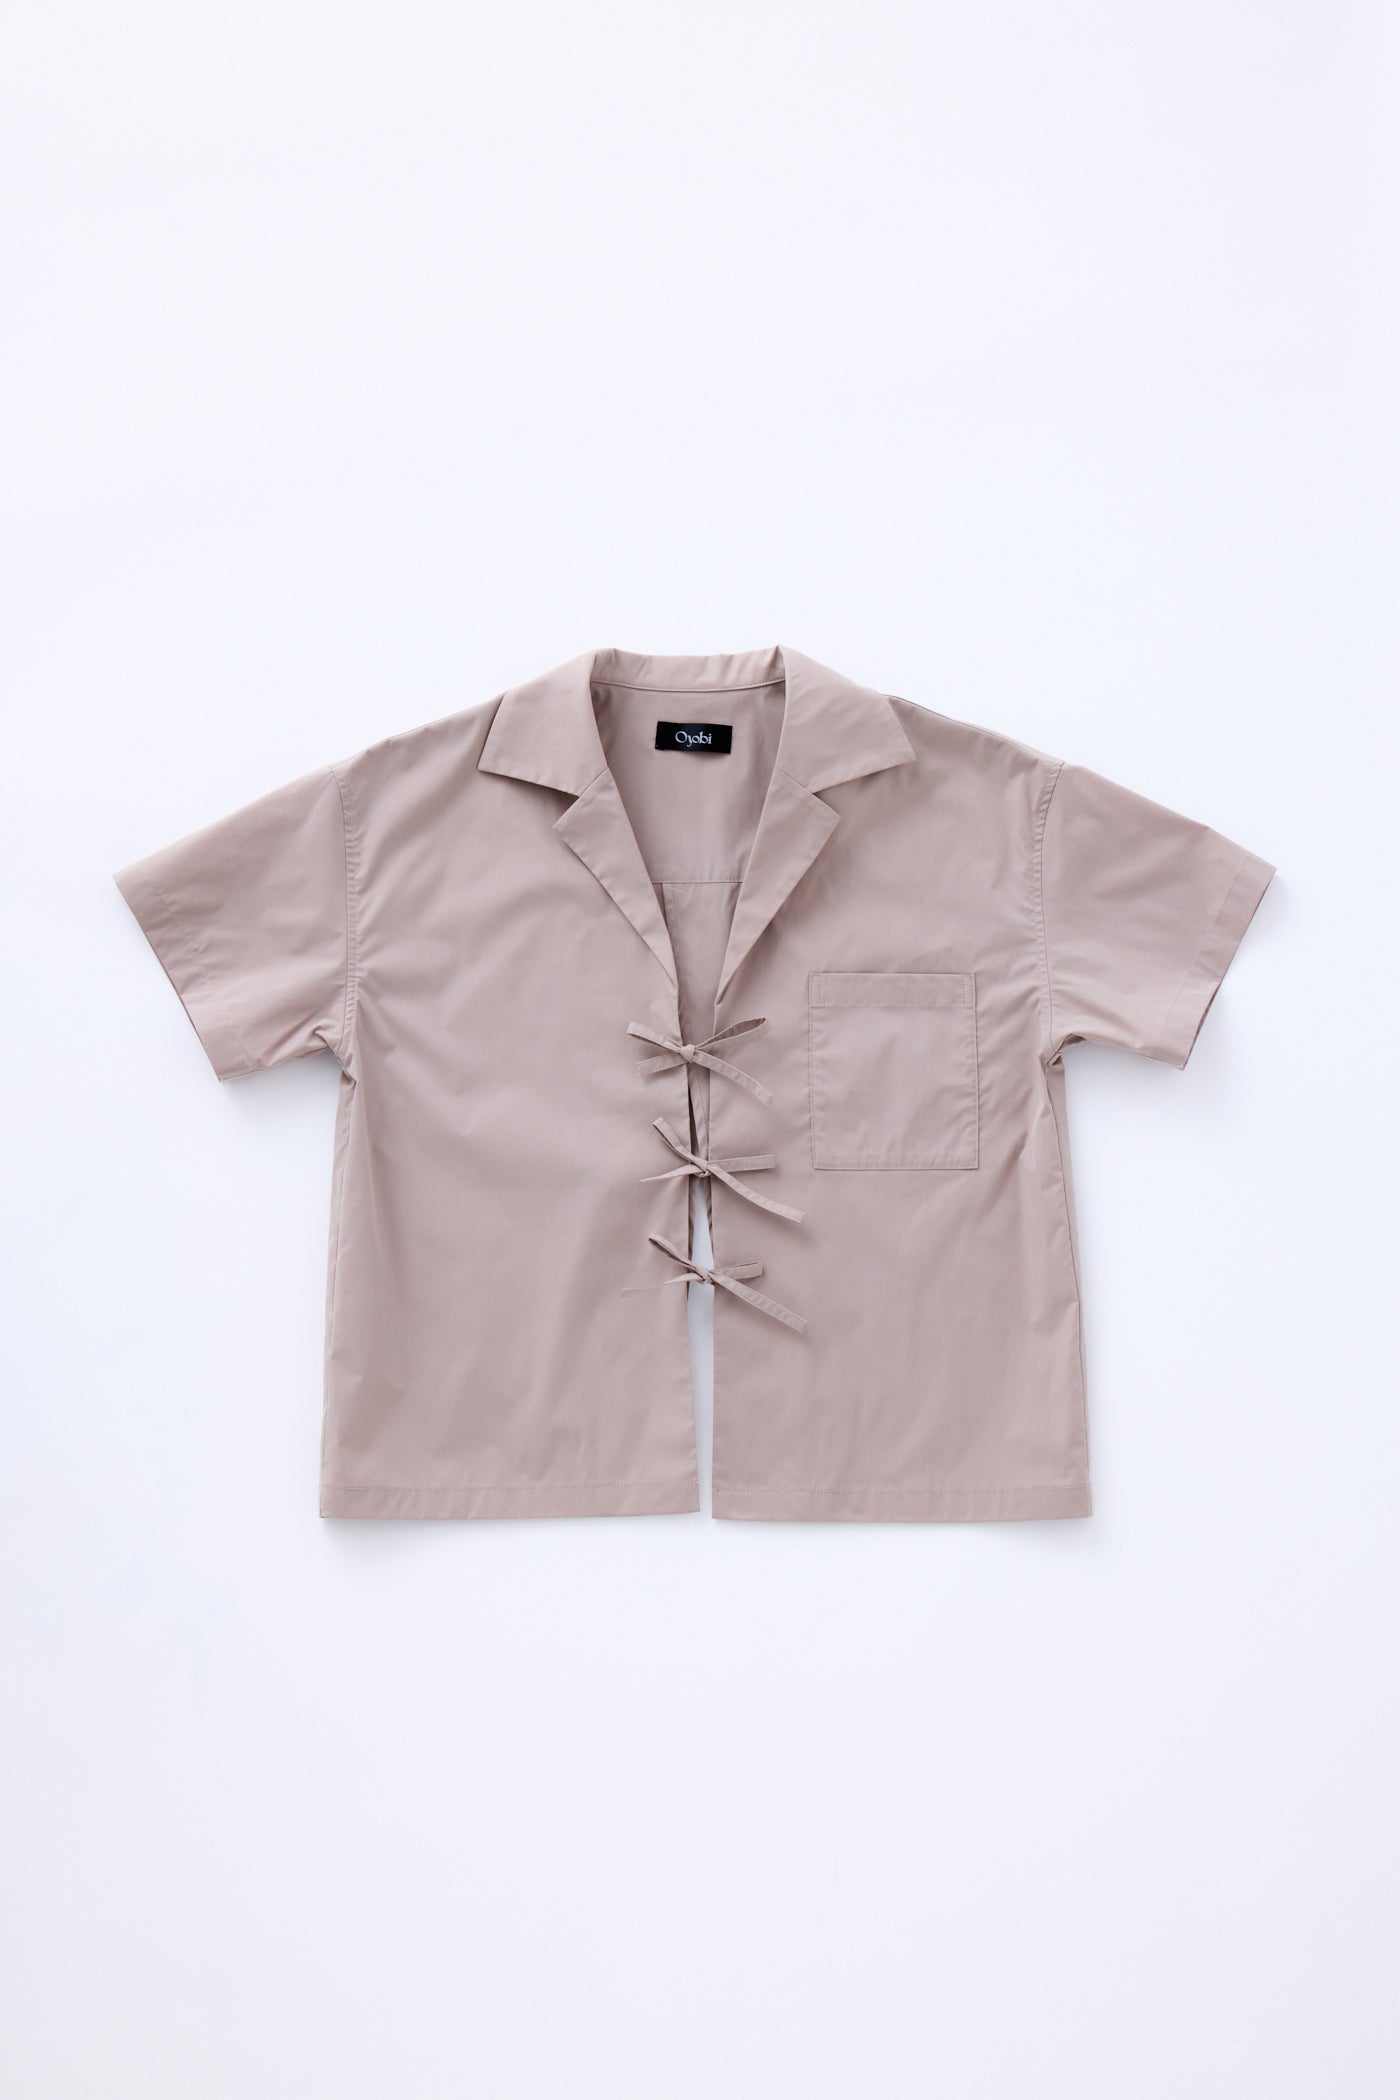 BOW KNOT S/S SHIRT